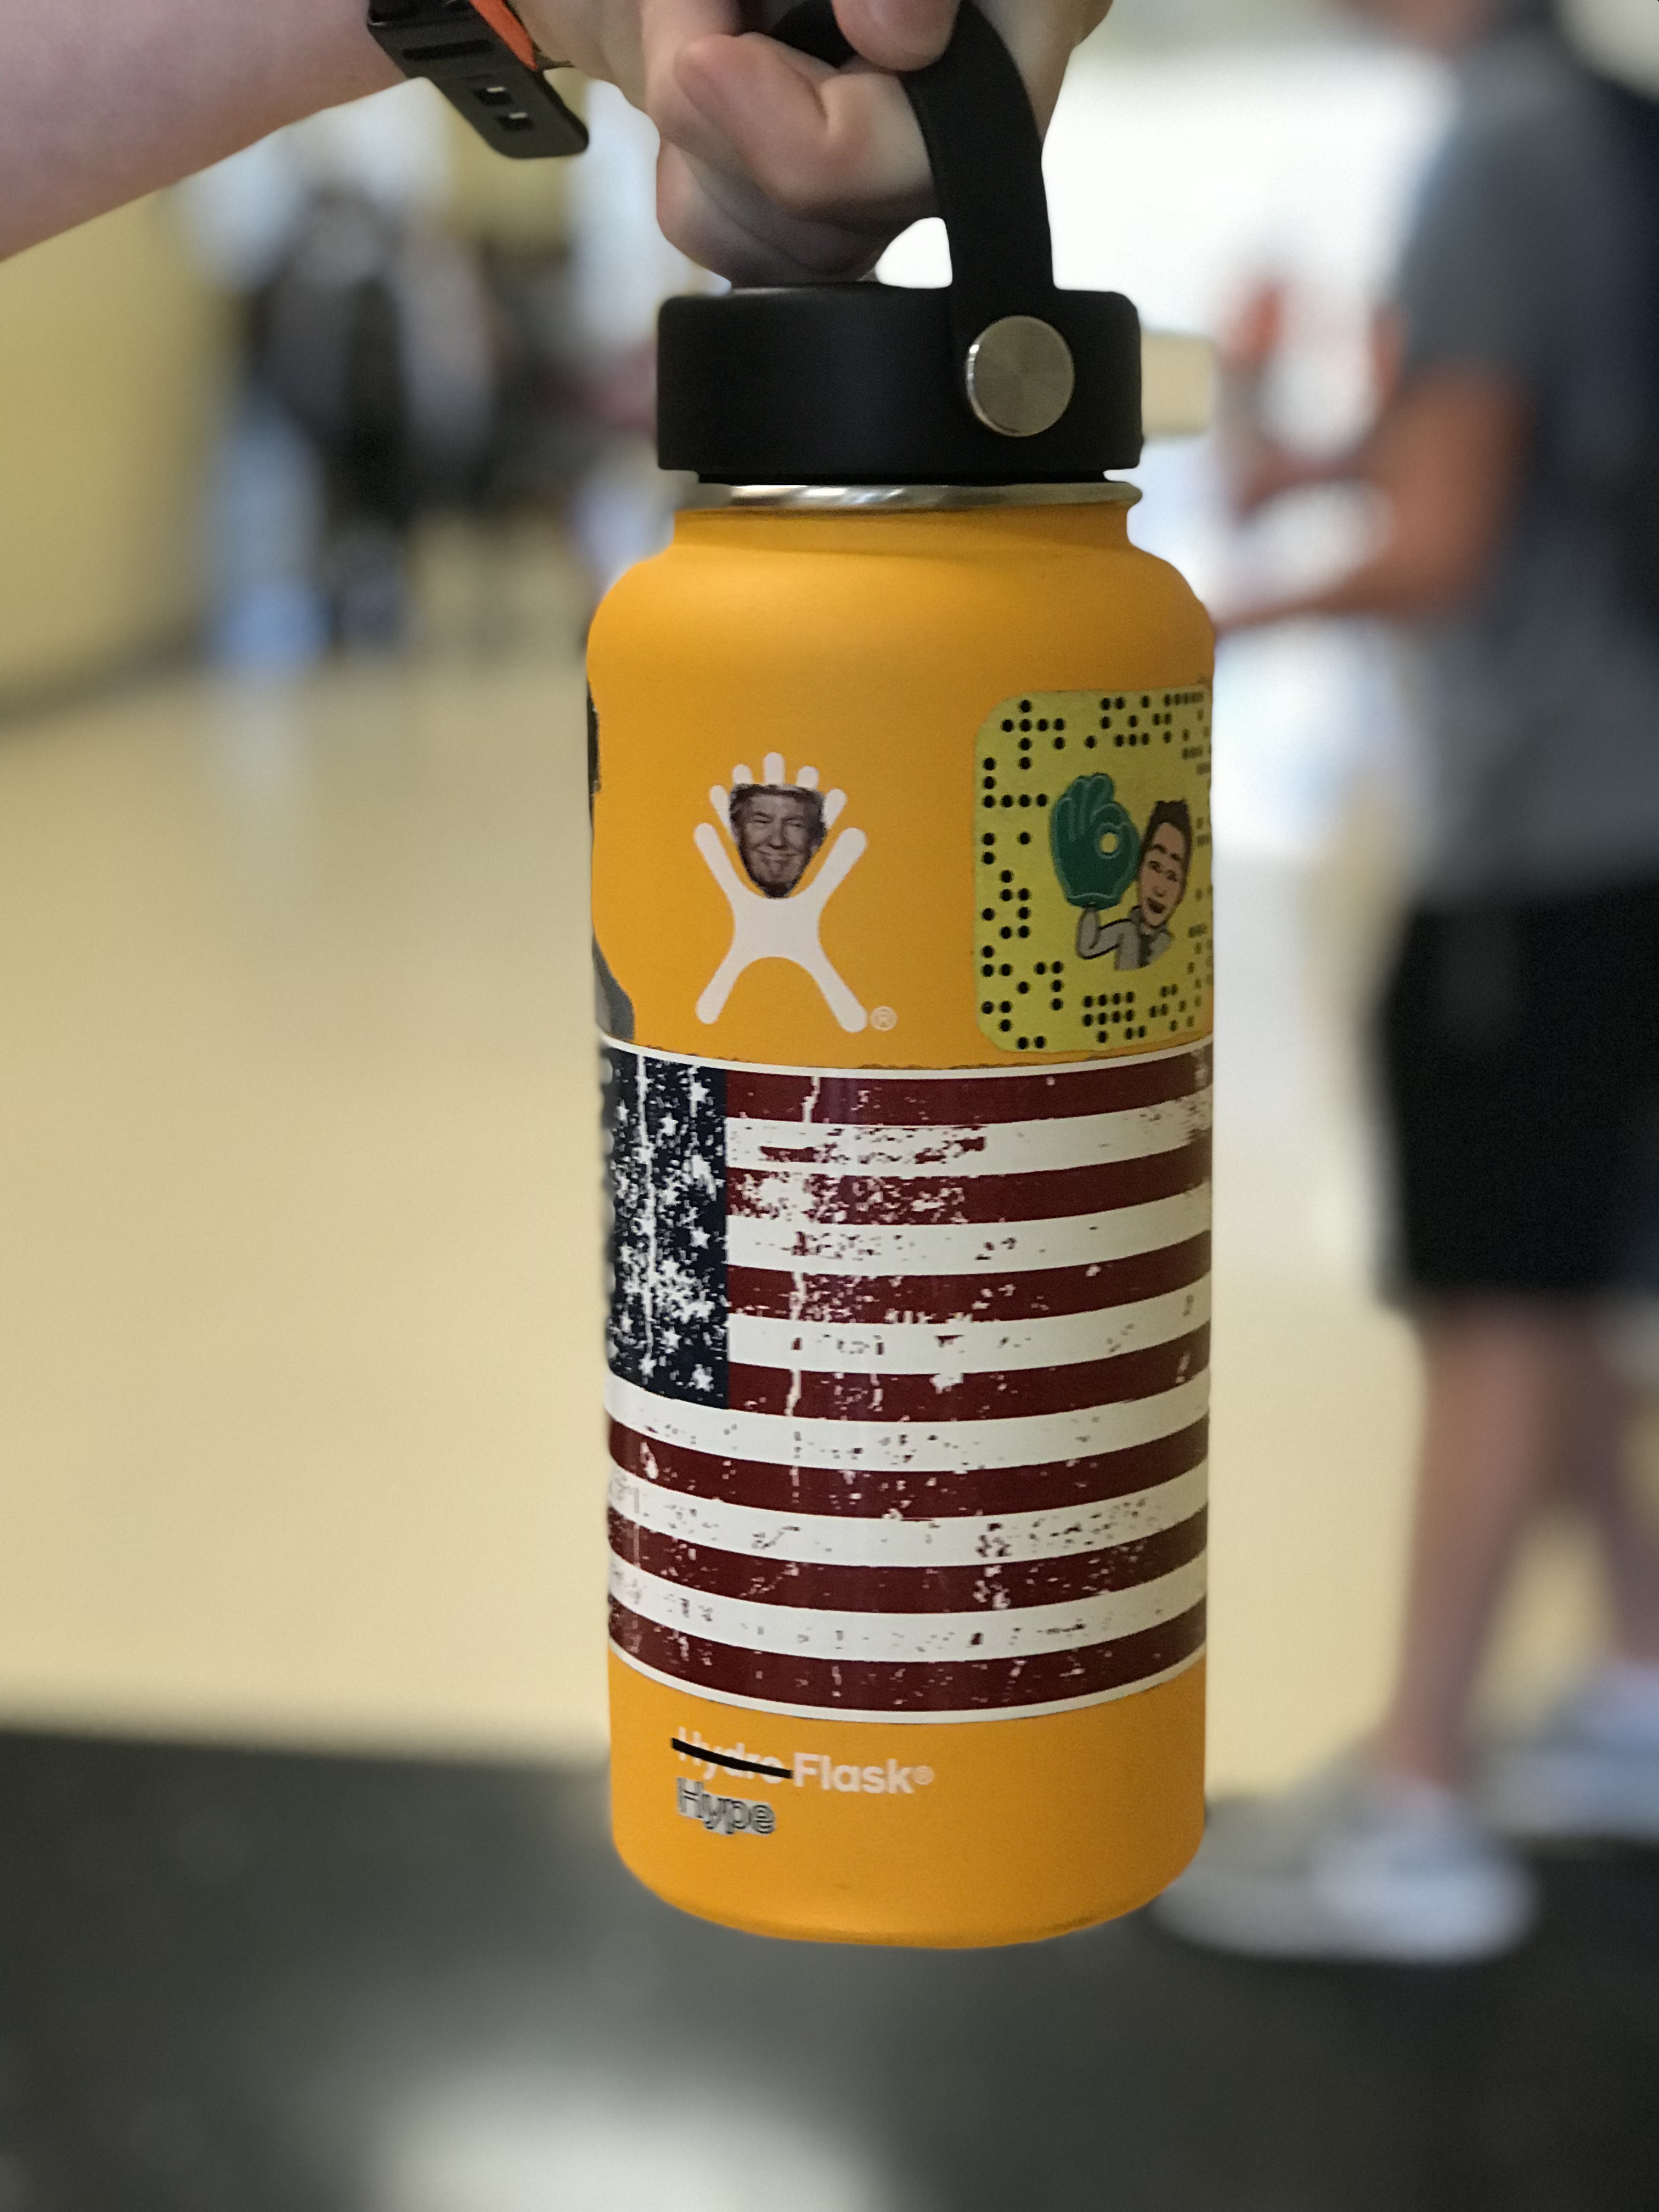 hydro flask decorated